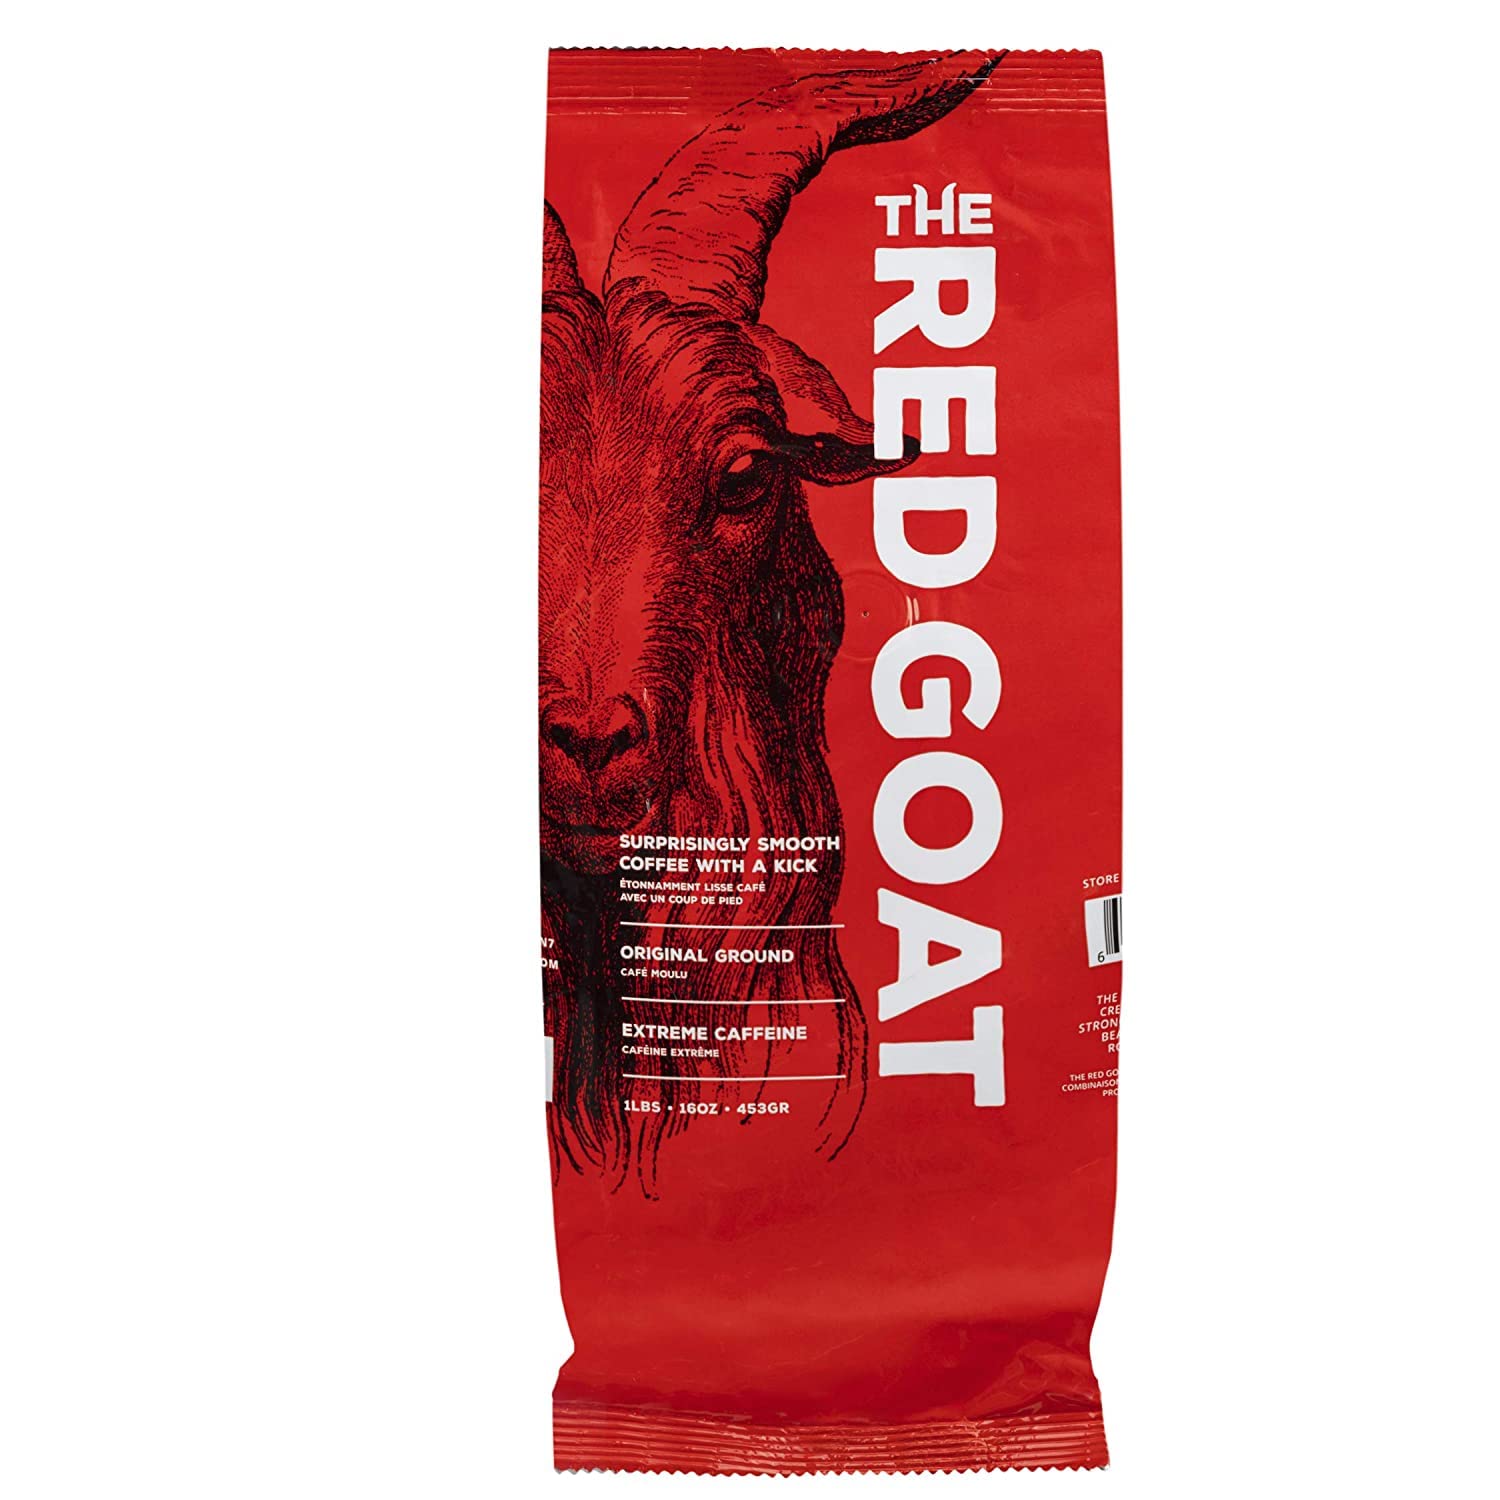 The Red Goat Ground Coffee Beans | Highest-Caffeine on the Market | 1 Cup = 6 Average Cups of Coffee | 17,000 UG/G Caffeine